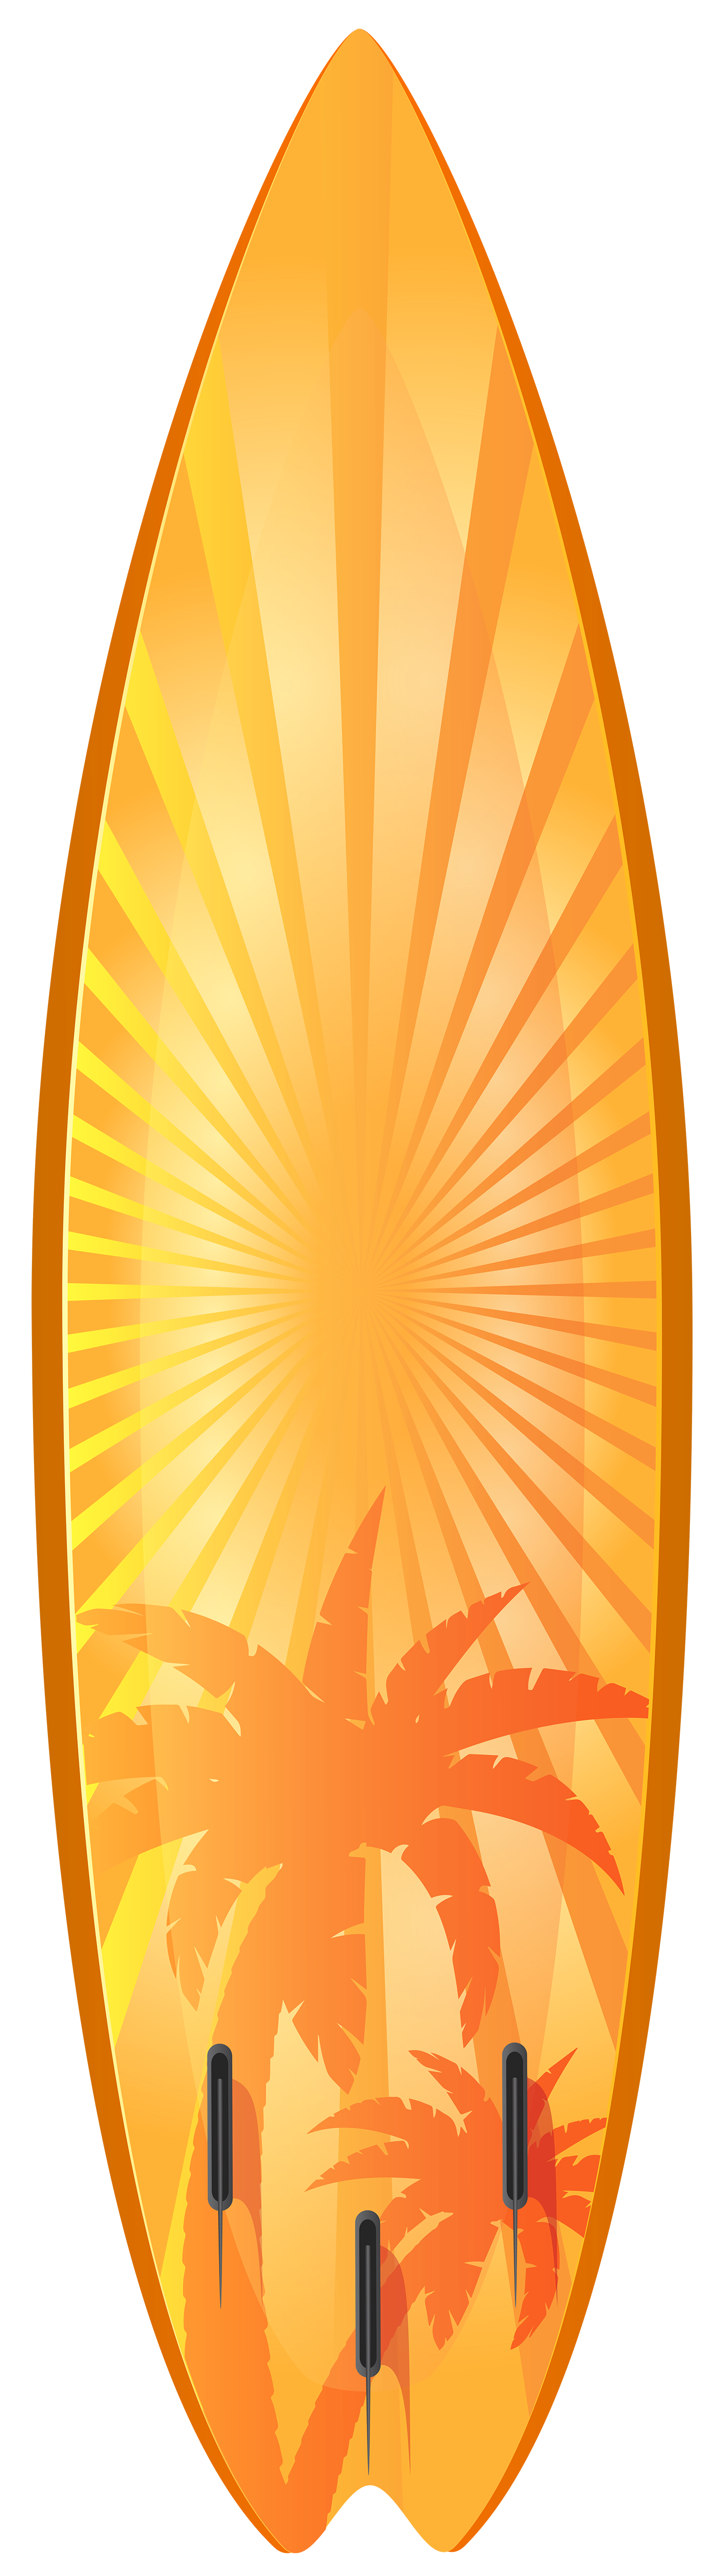 Download Orange Surfboard With Palm Trees Transparent Image Clipart Png